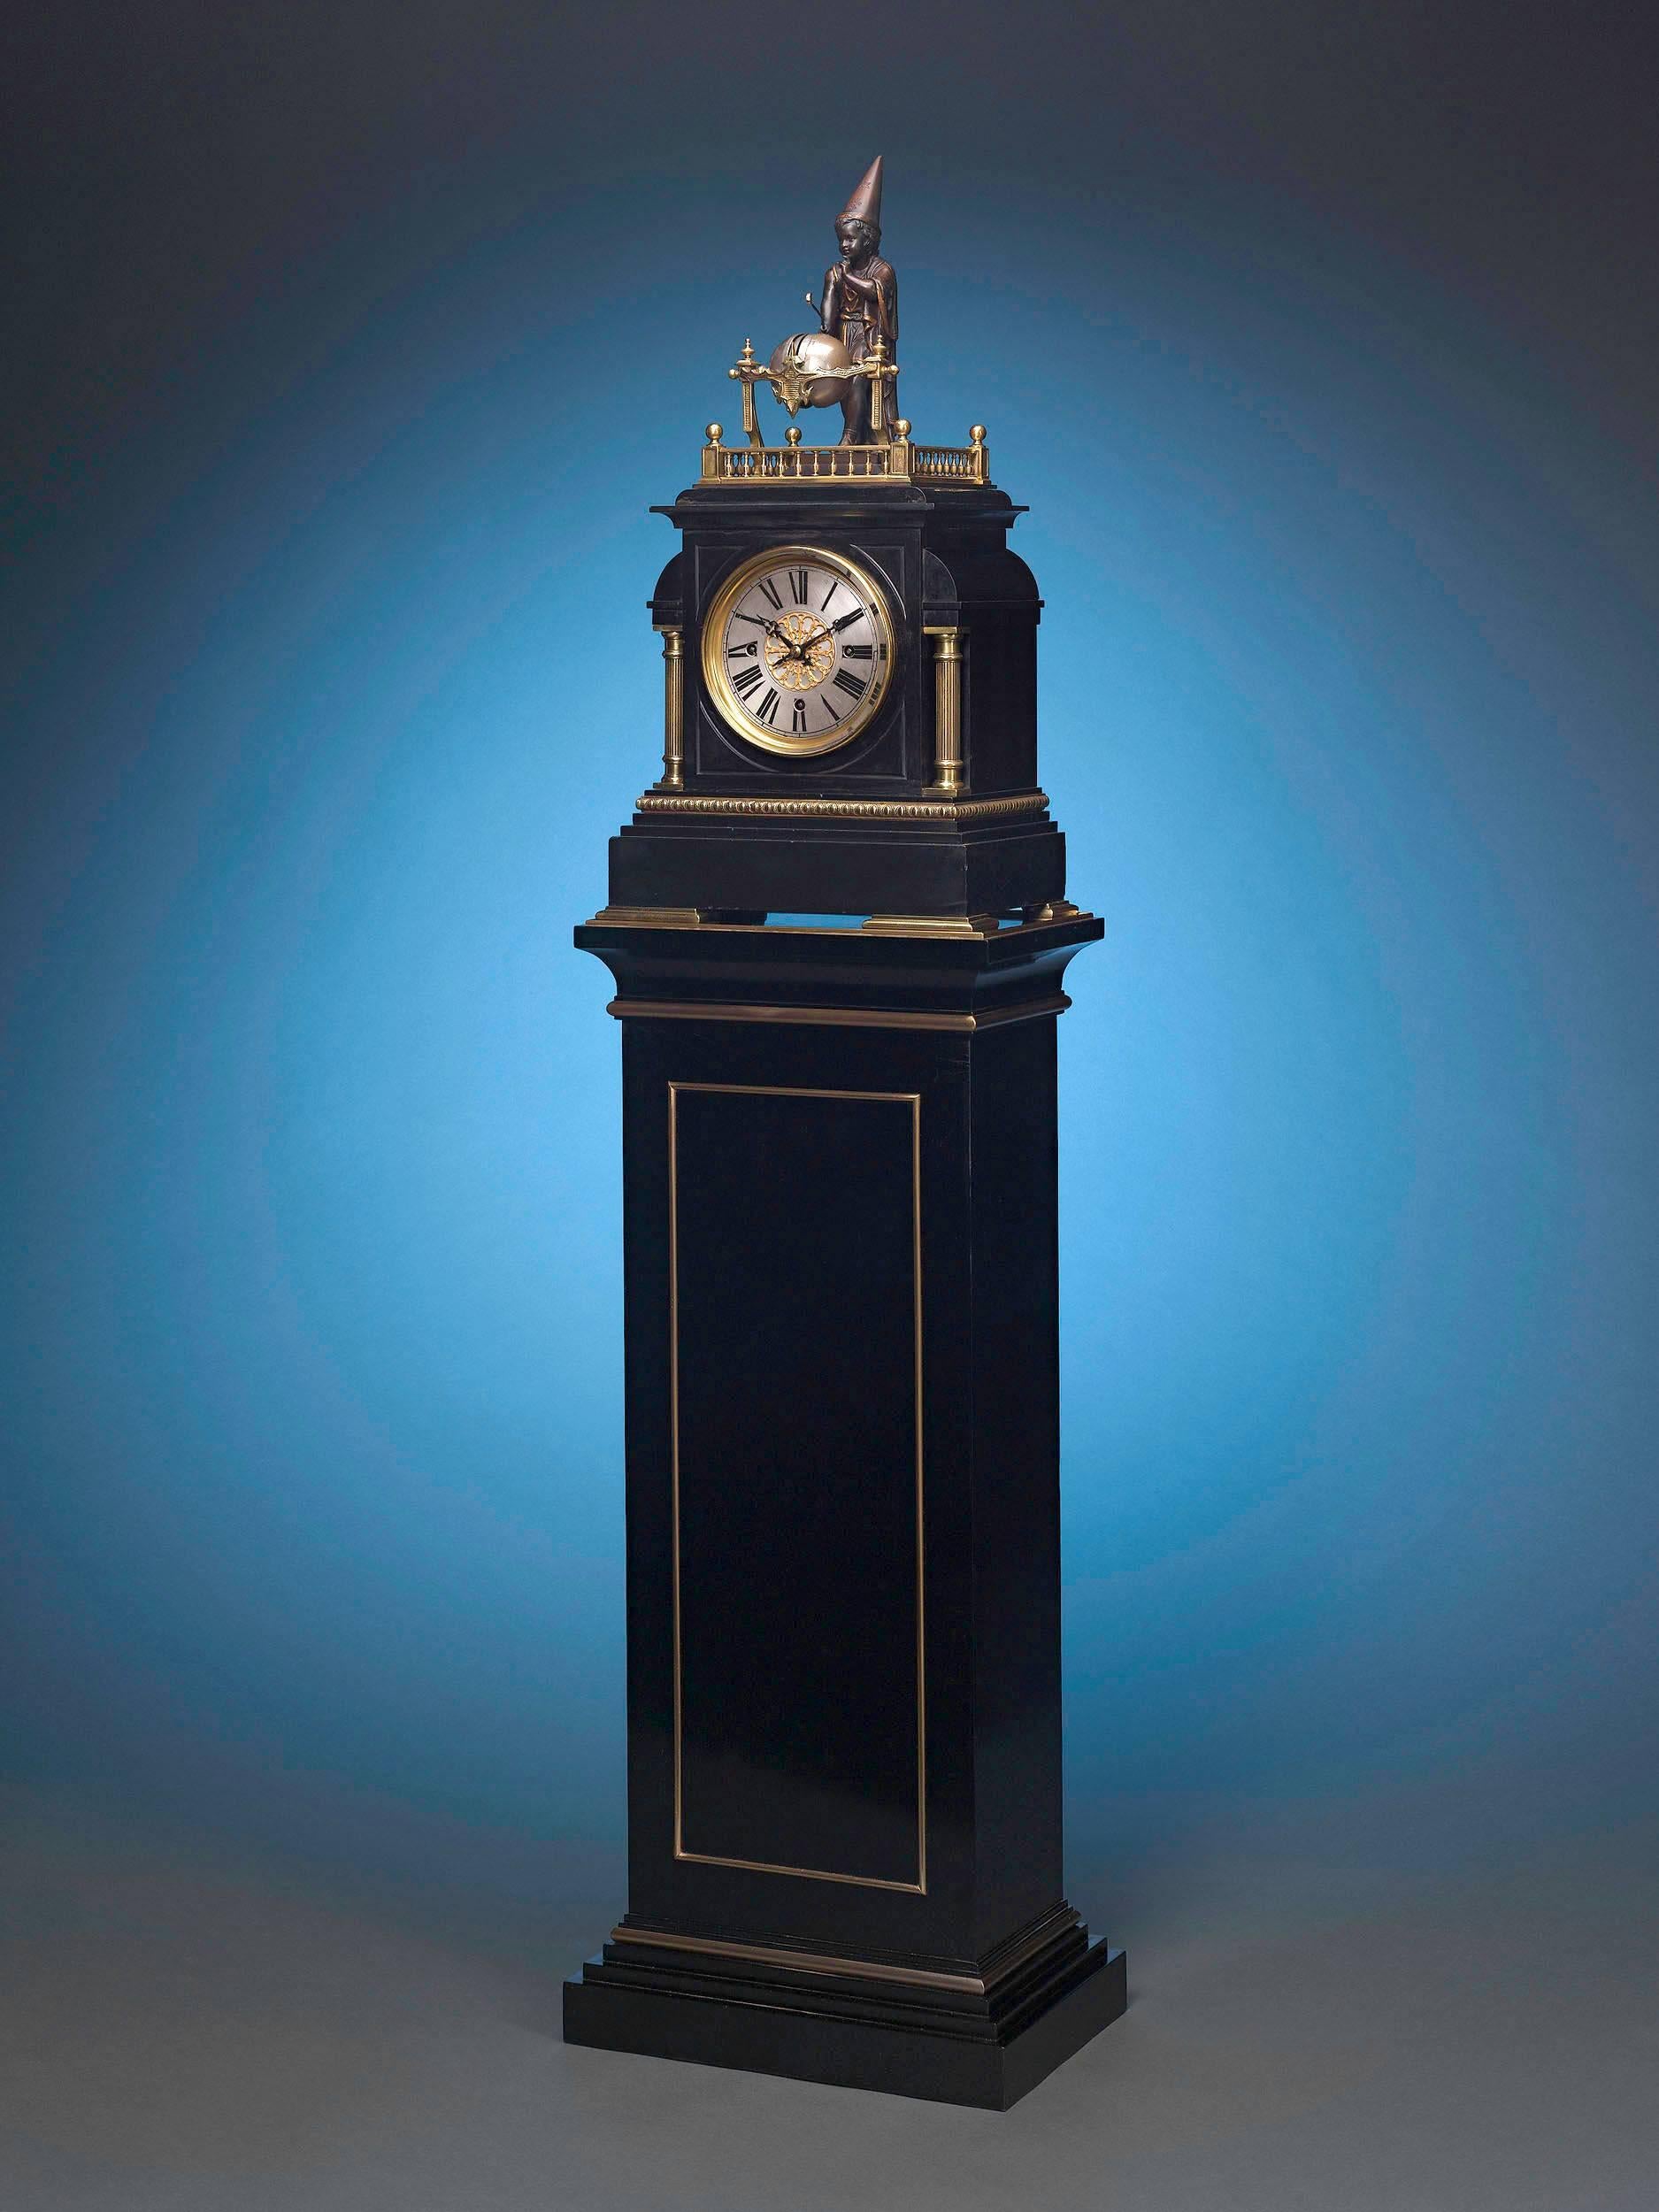 This incredibly rare automaton clock is surmounted by a charming young wizard. On the quarters of the hour, he sounds the time on four Westminster chimes with a Hammer held in his right hand. The bells of this intriguing piece are housed in a